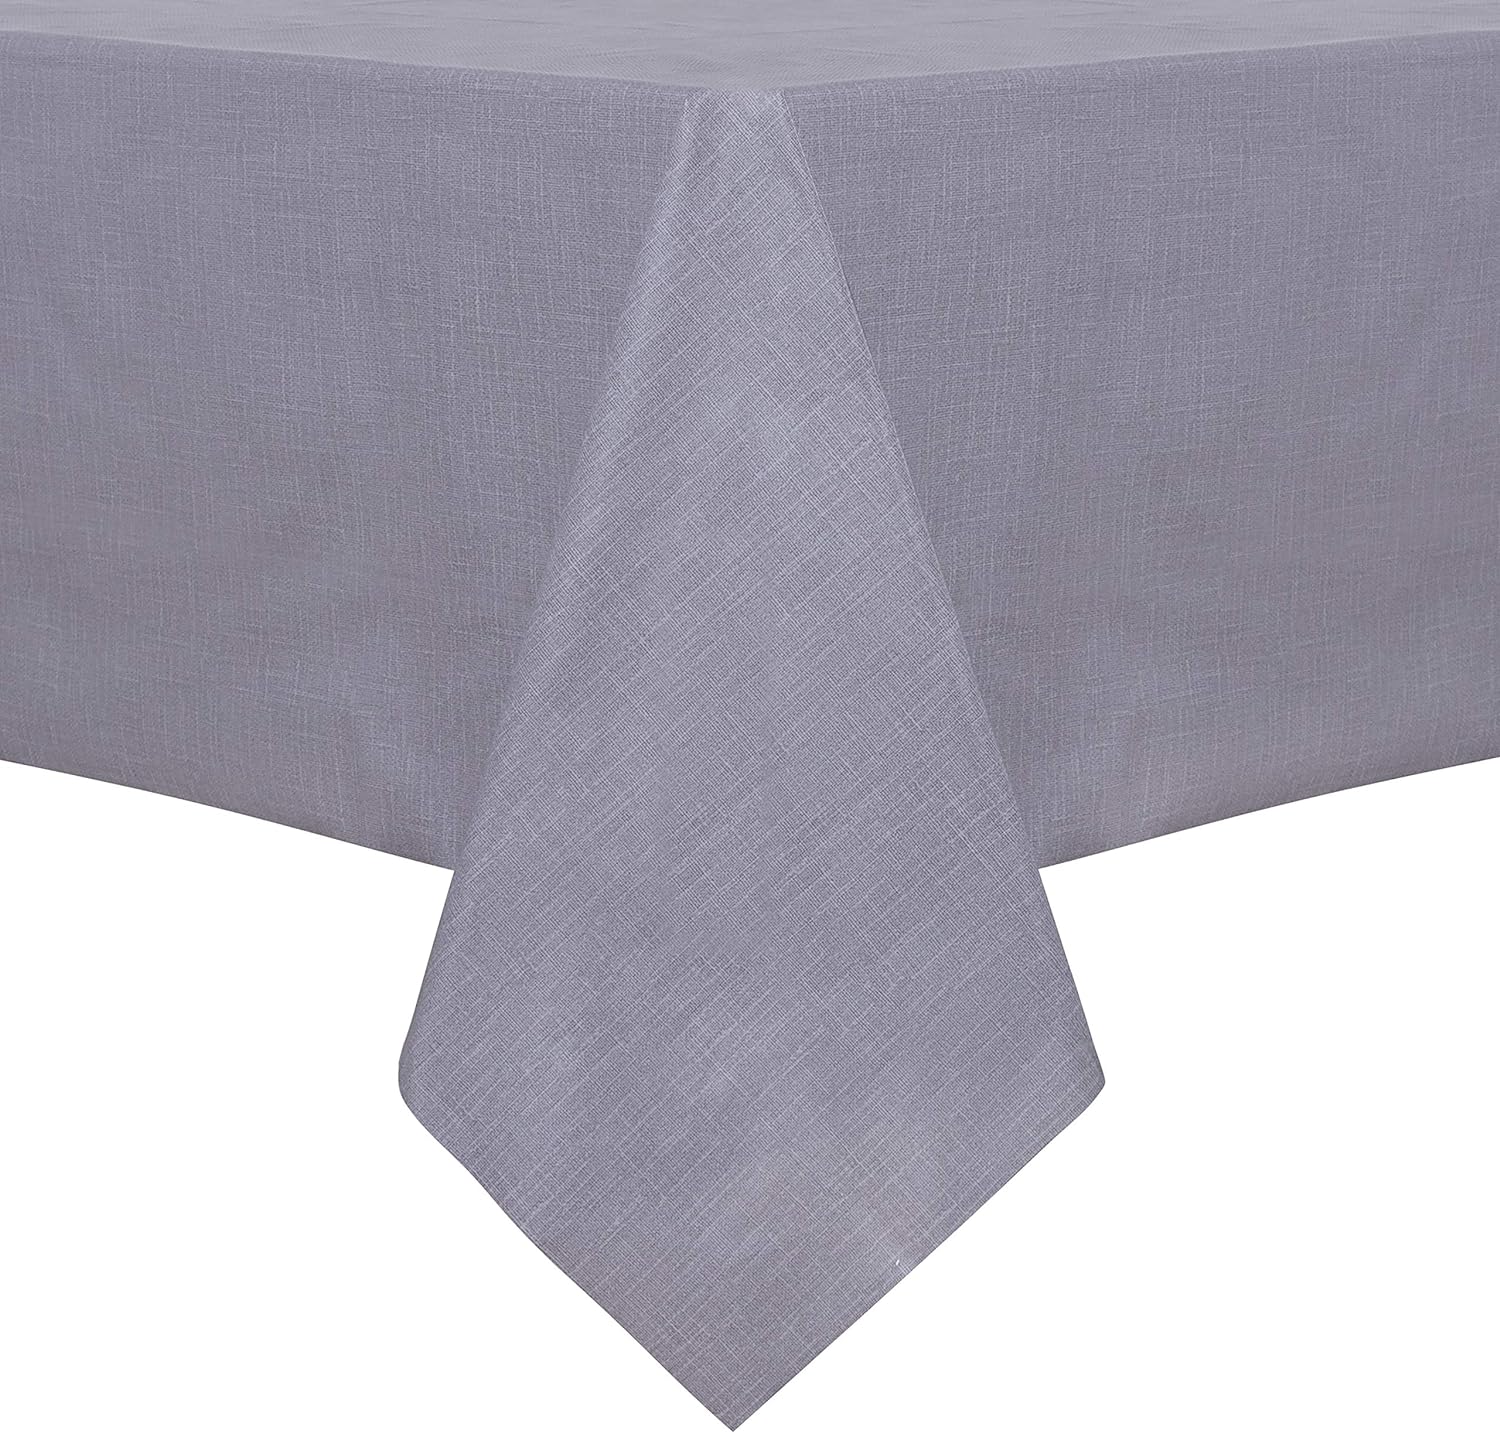 sancua 100% Waterproof Rectangle PVC Tablecloth - 54 x 78 Inch - Oil Proof Spill Proof Vinyl Table Cloth, Wipe Clean Table Cover for Dining Table, Buffet Parties and Camping, Grey